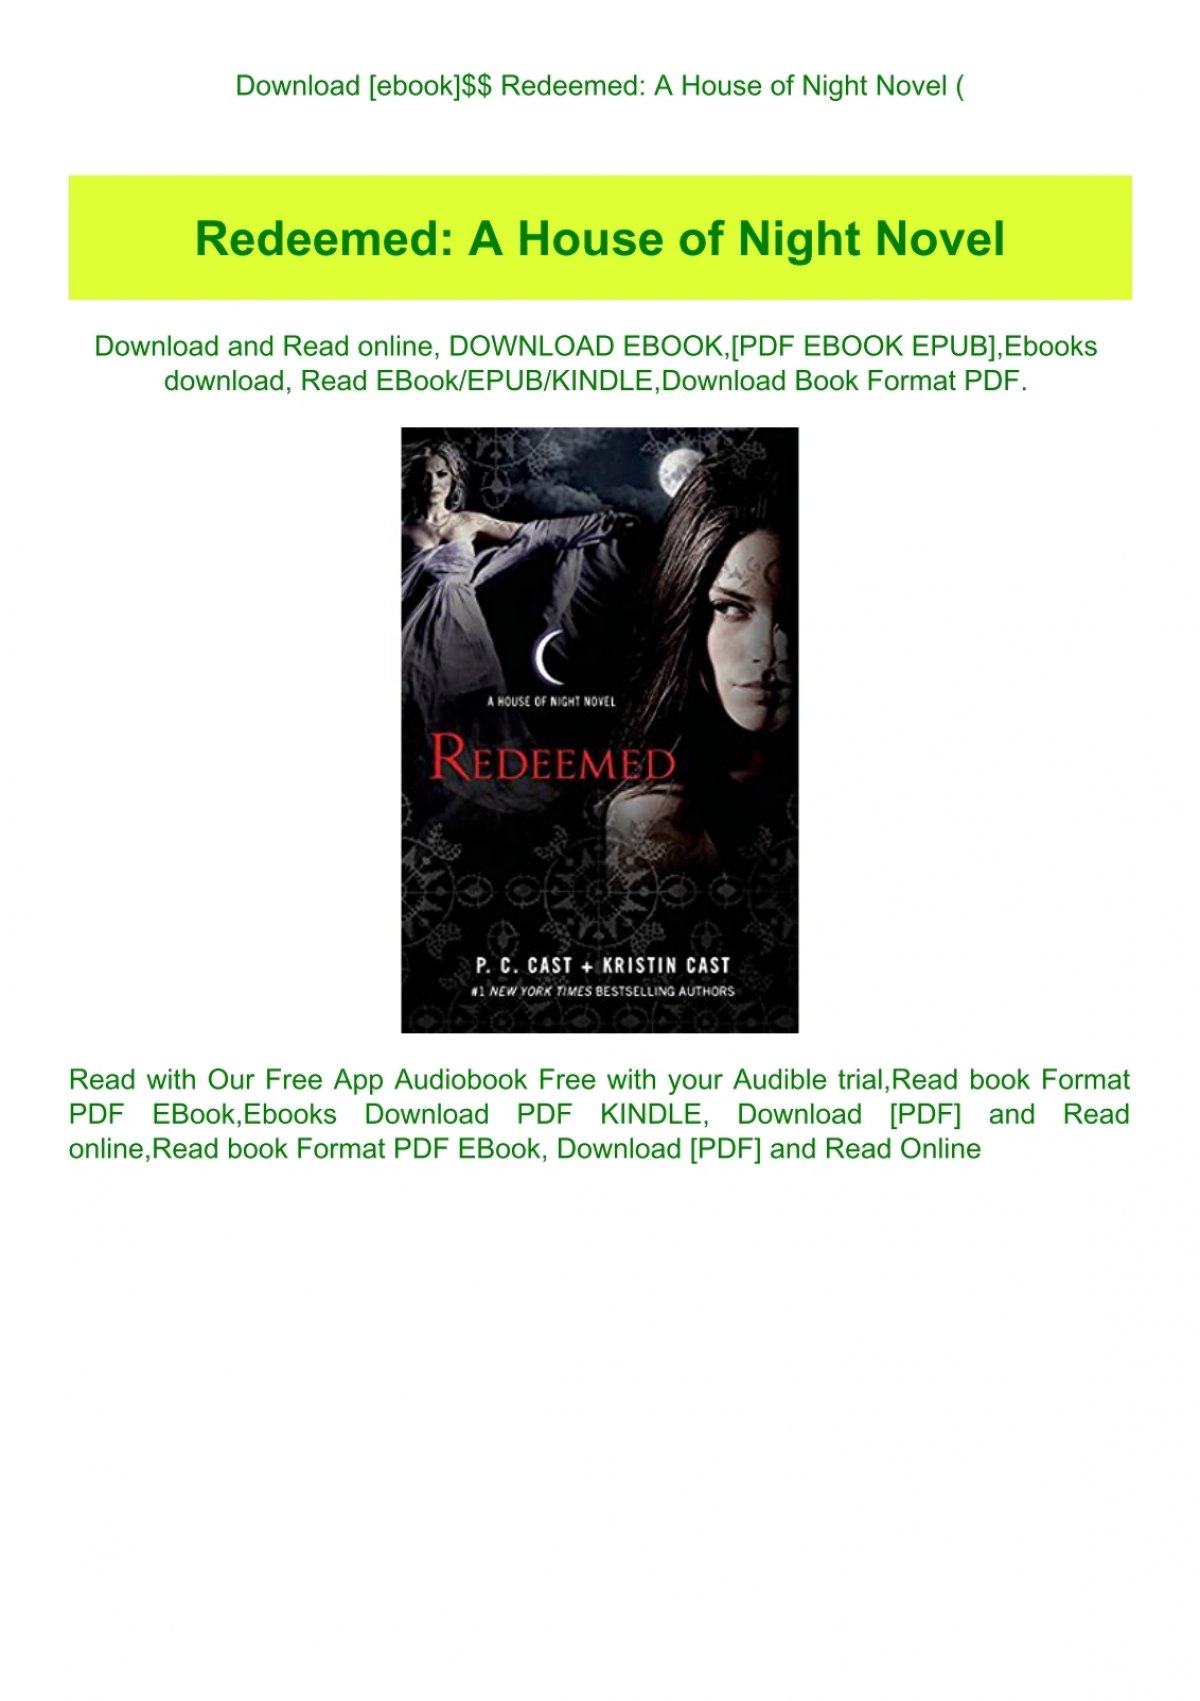 House Of Night 1 Download Free Ebook